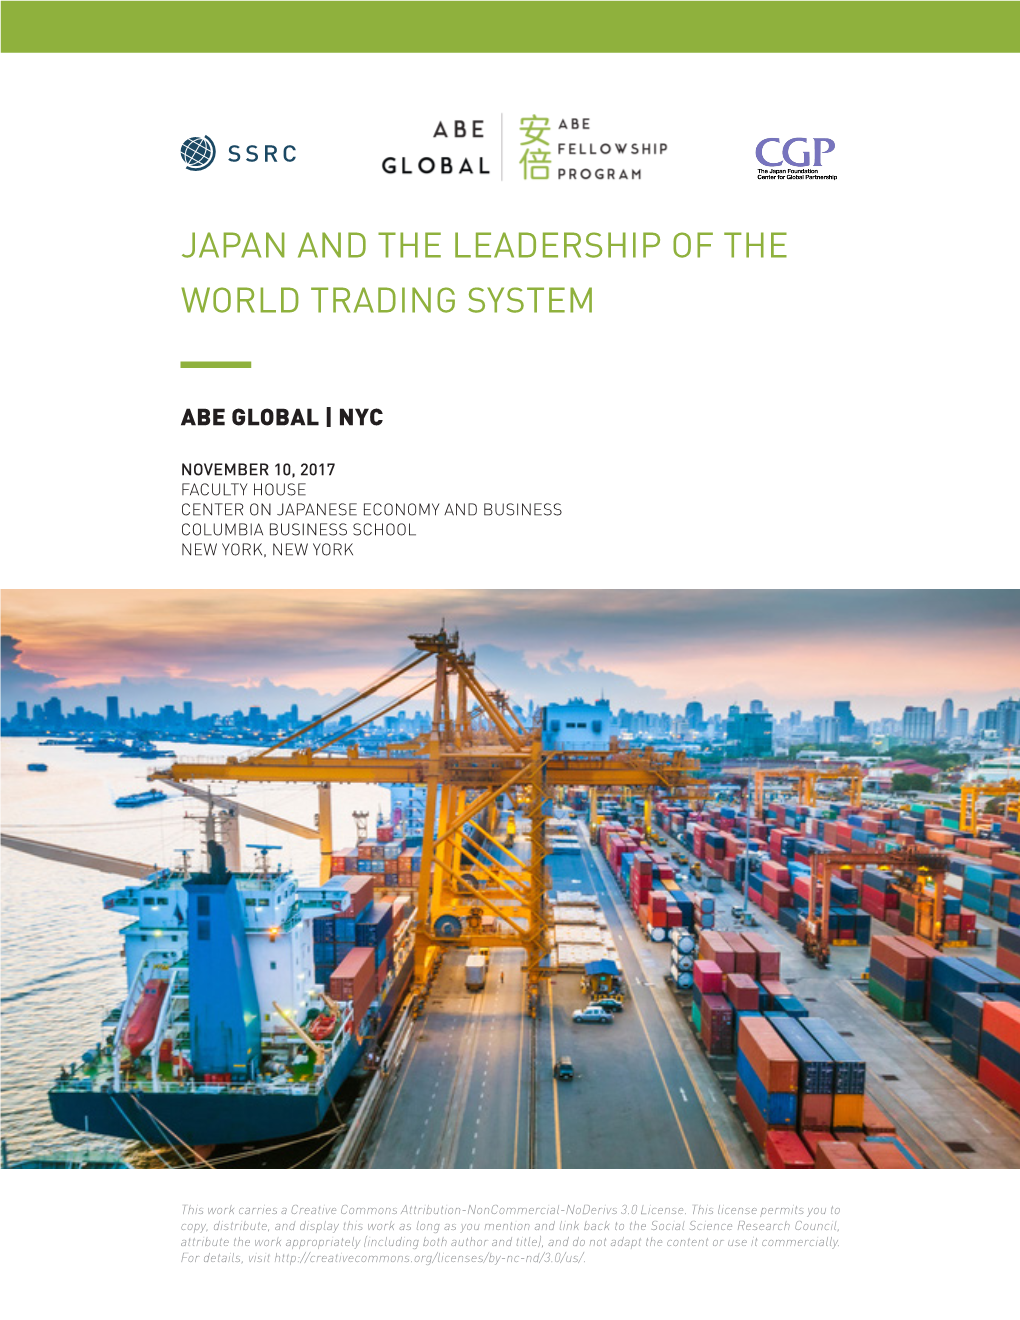 Japan and the Leadership of the World Trading System